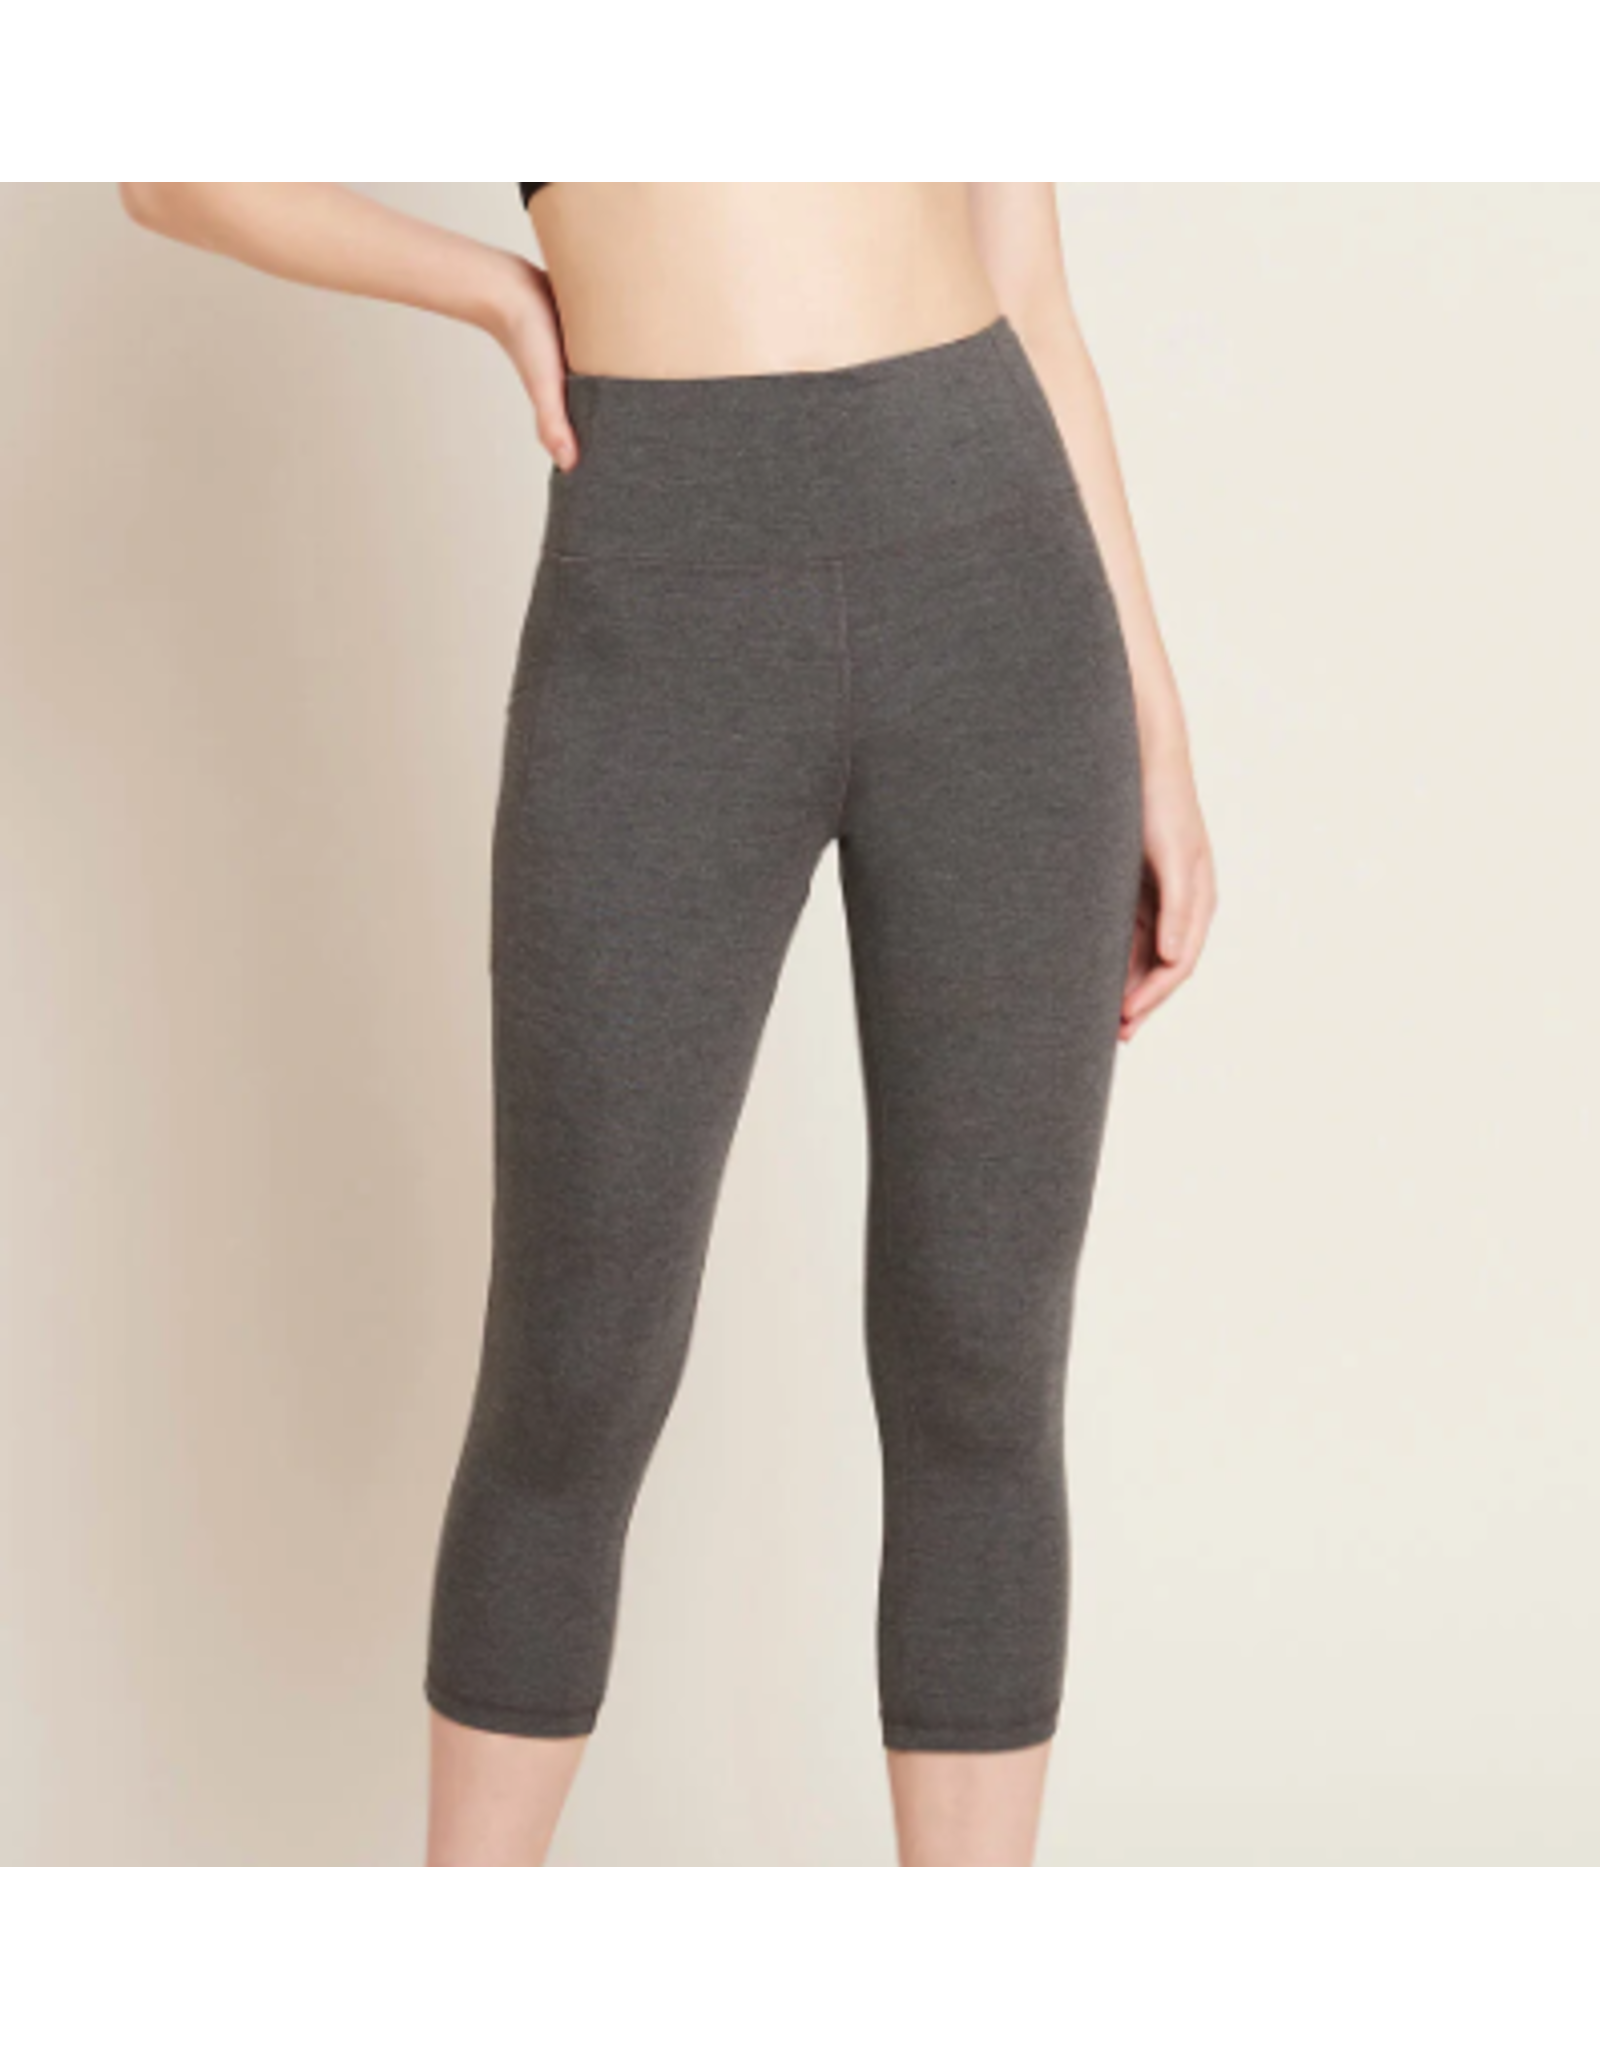 Boody Active High Waist 3/4 Legging with Pockets - The Apple Tree